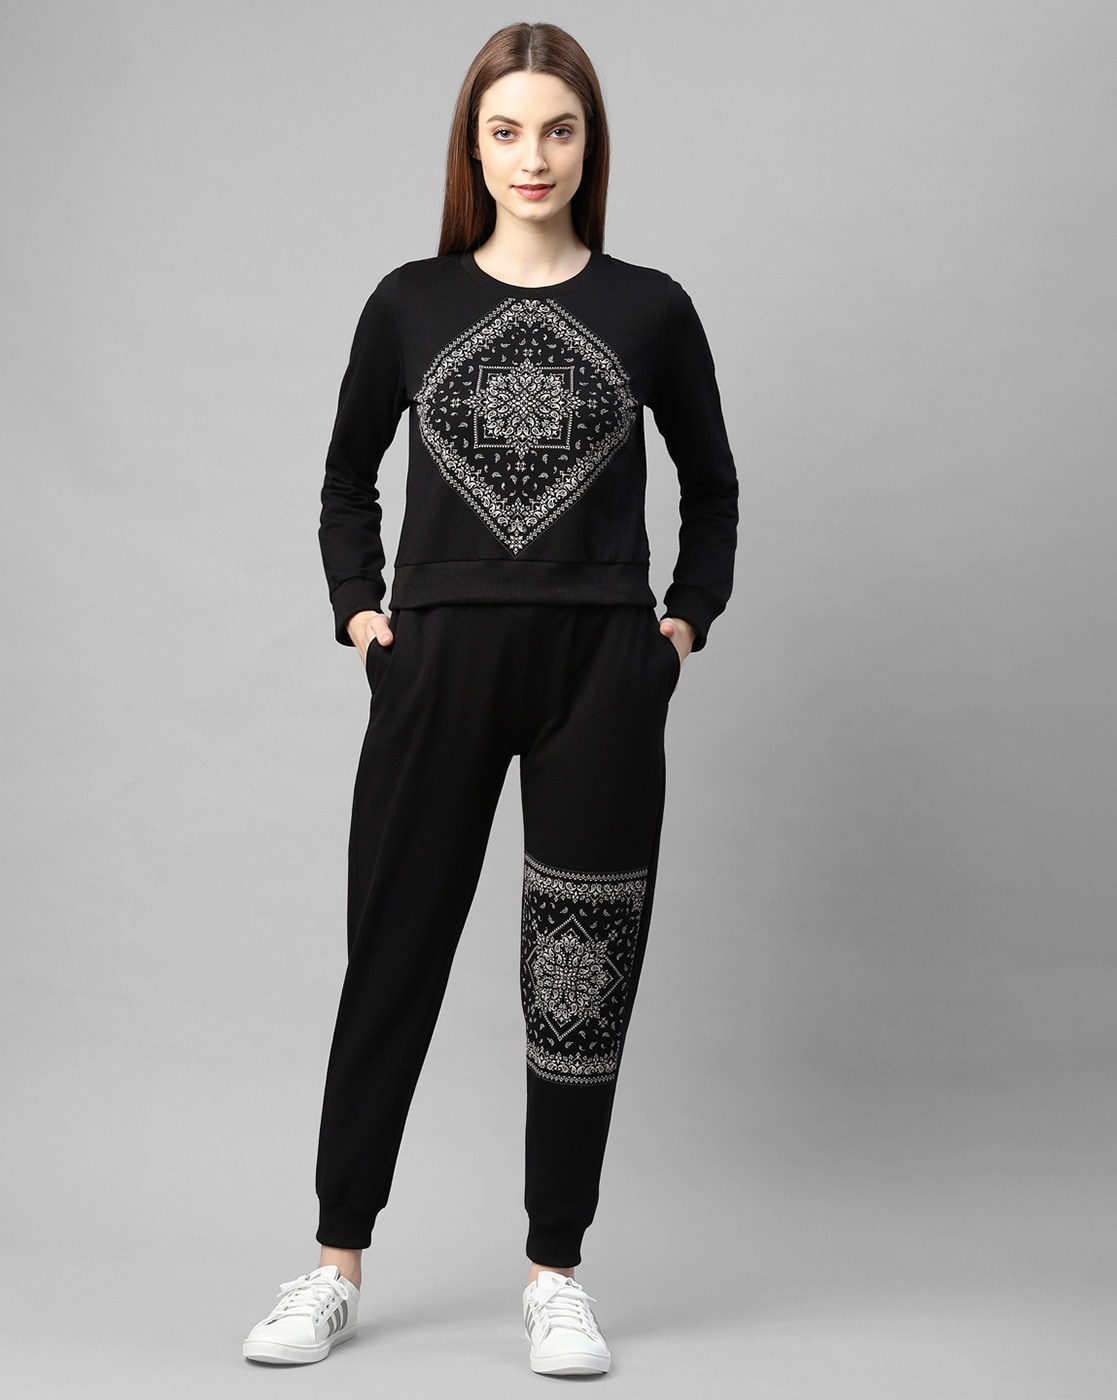 Buy Track Suits For Women At Lowest Prices Online In India | Tata CLiQ